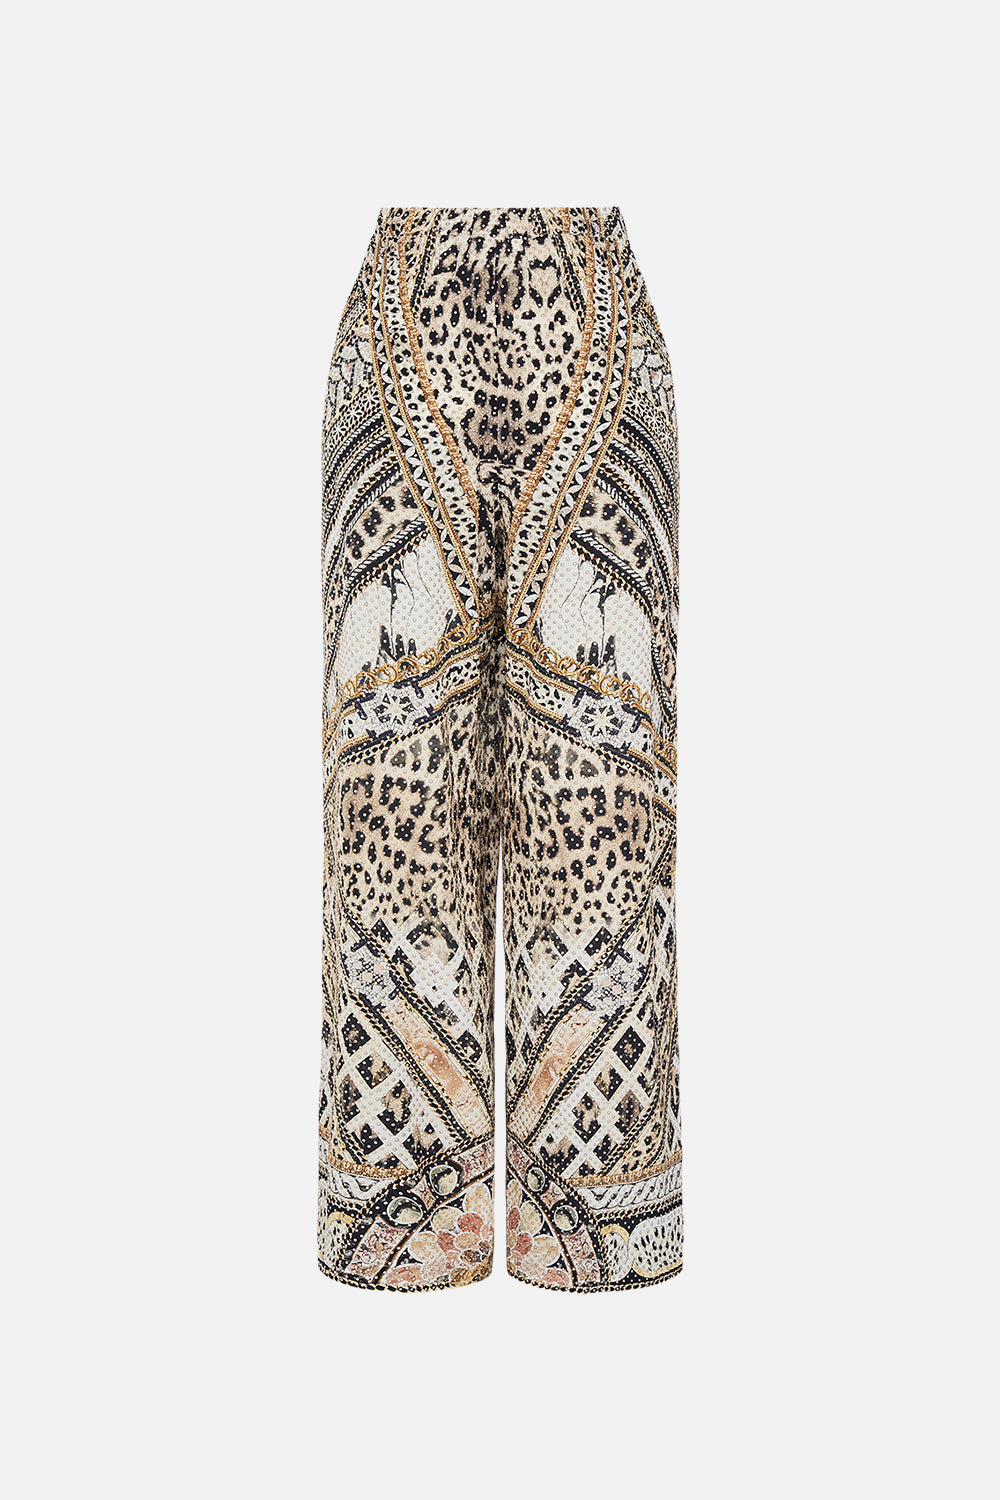 Back product view of CAMILLA silk animal print pants in Mosaic Muse 